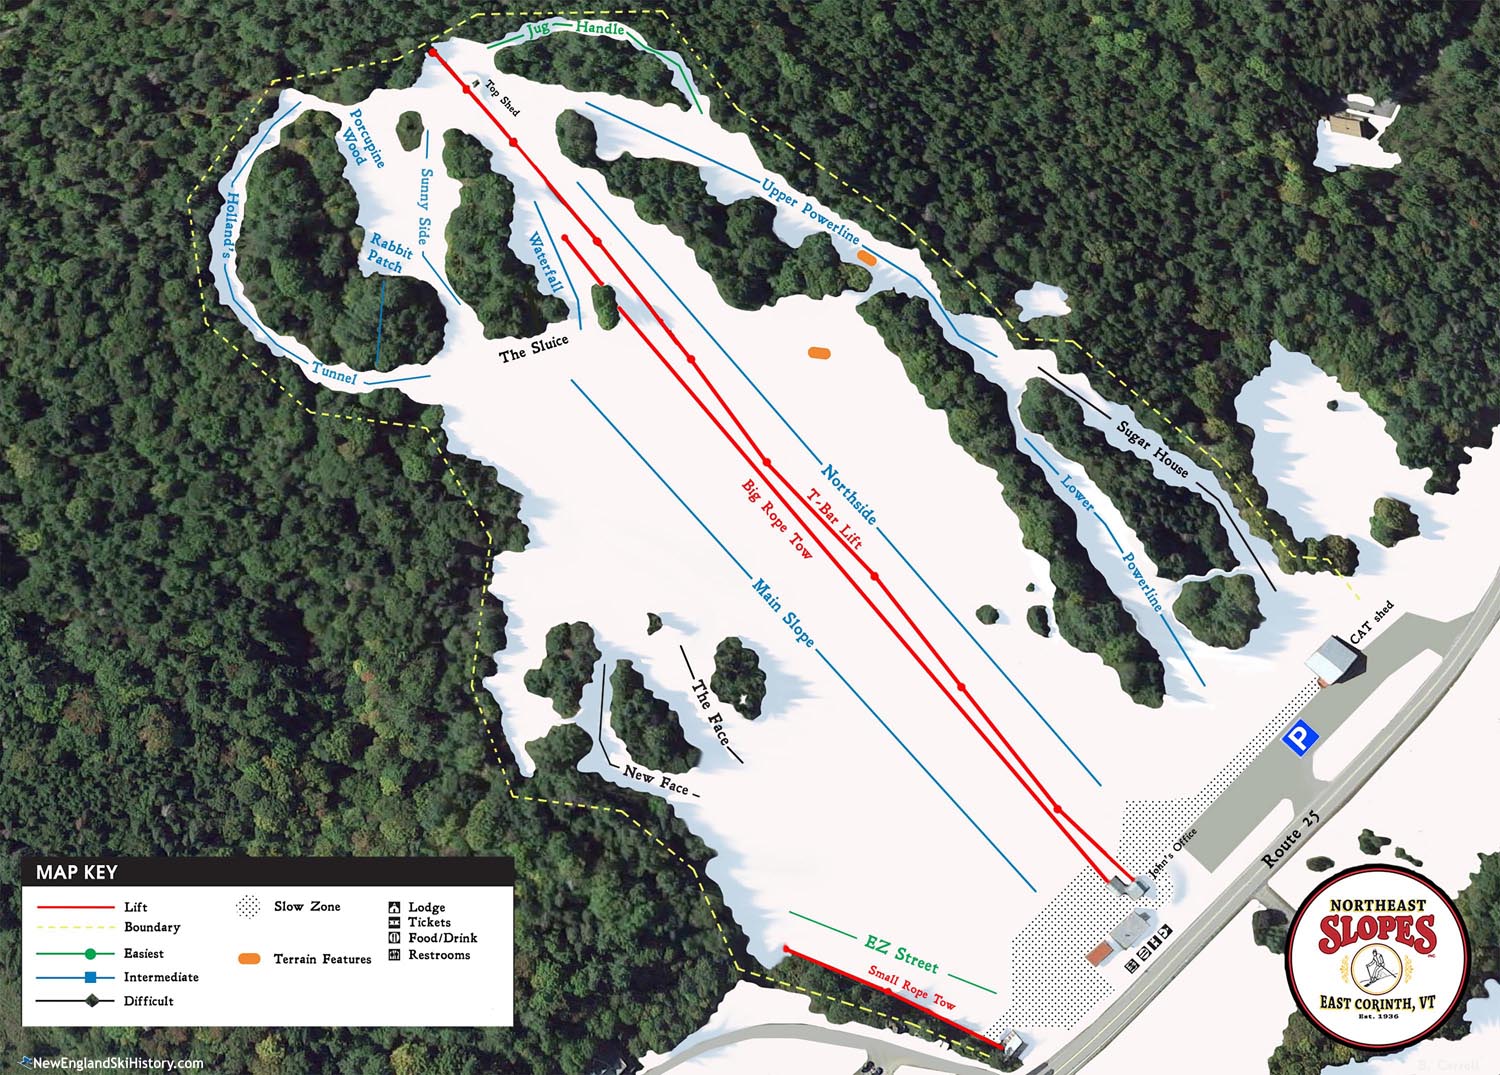 2022-23 Northeast Slopes Trail Map